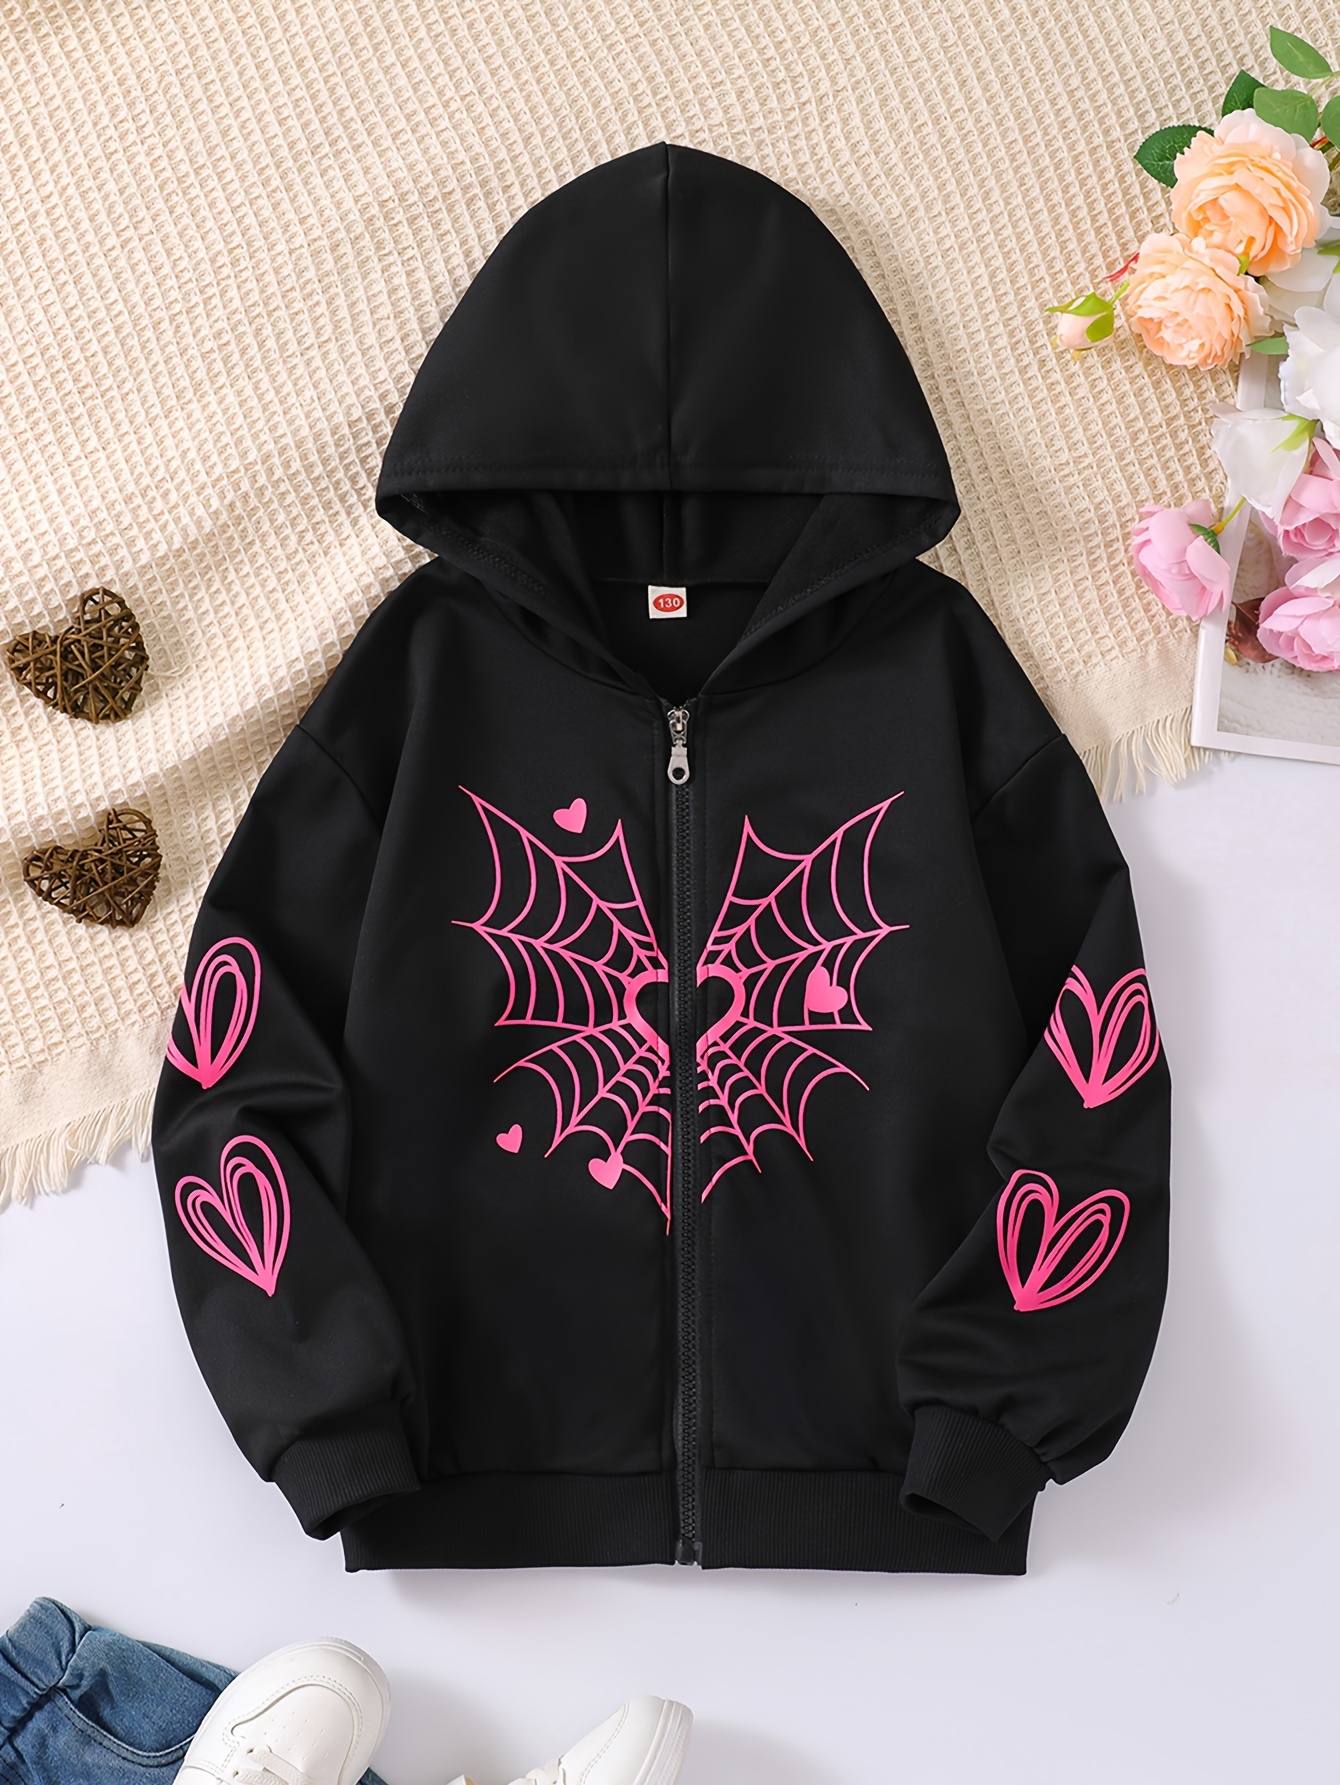 Toddler Graphics Heart-shaped and Letter Print Long-sleeve Hooded Pullover